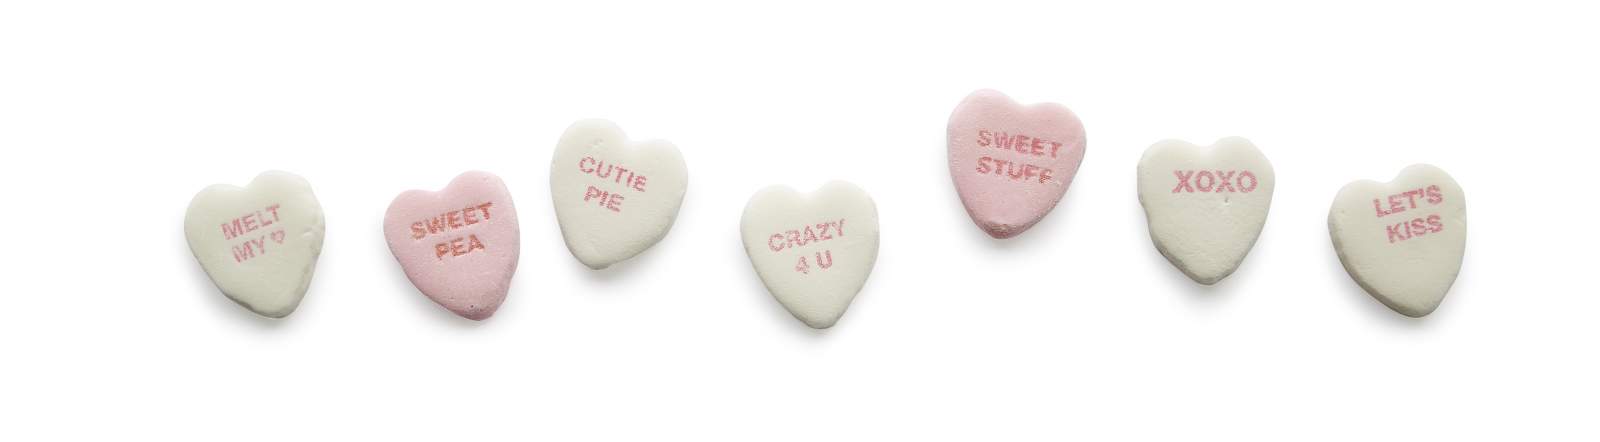 Sweethearts candies are back for Valentine's Day, but some are blank